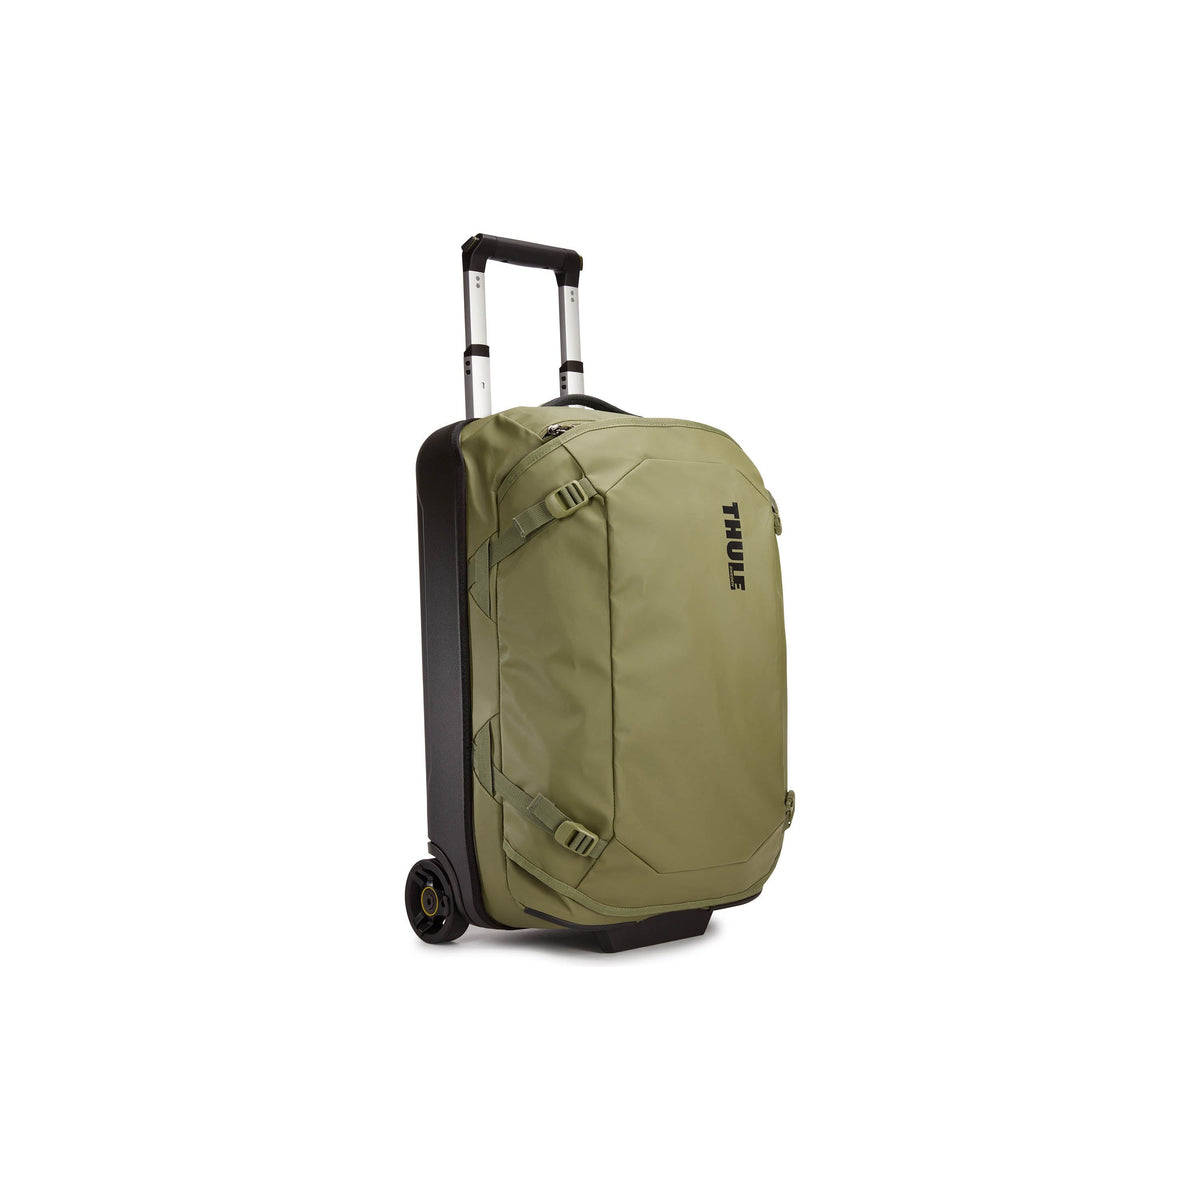 Thule Chasm Carry On Luggage